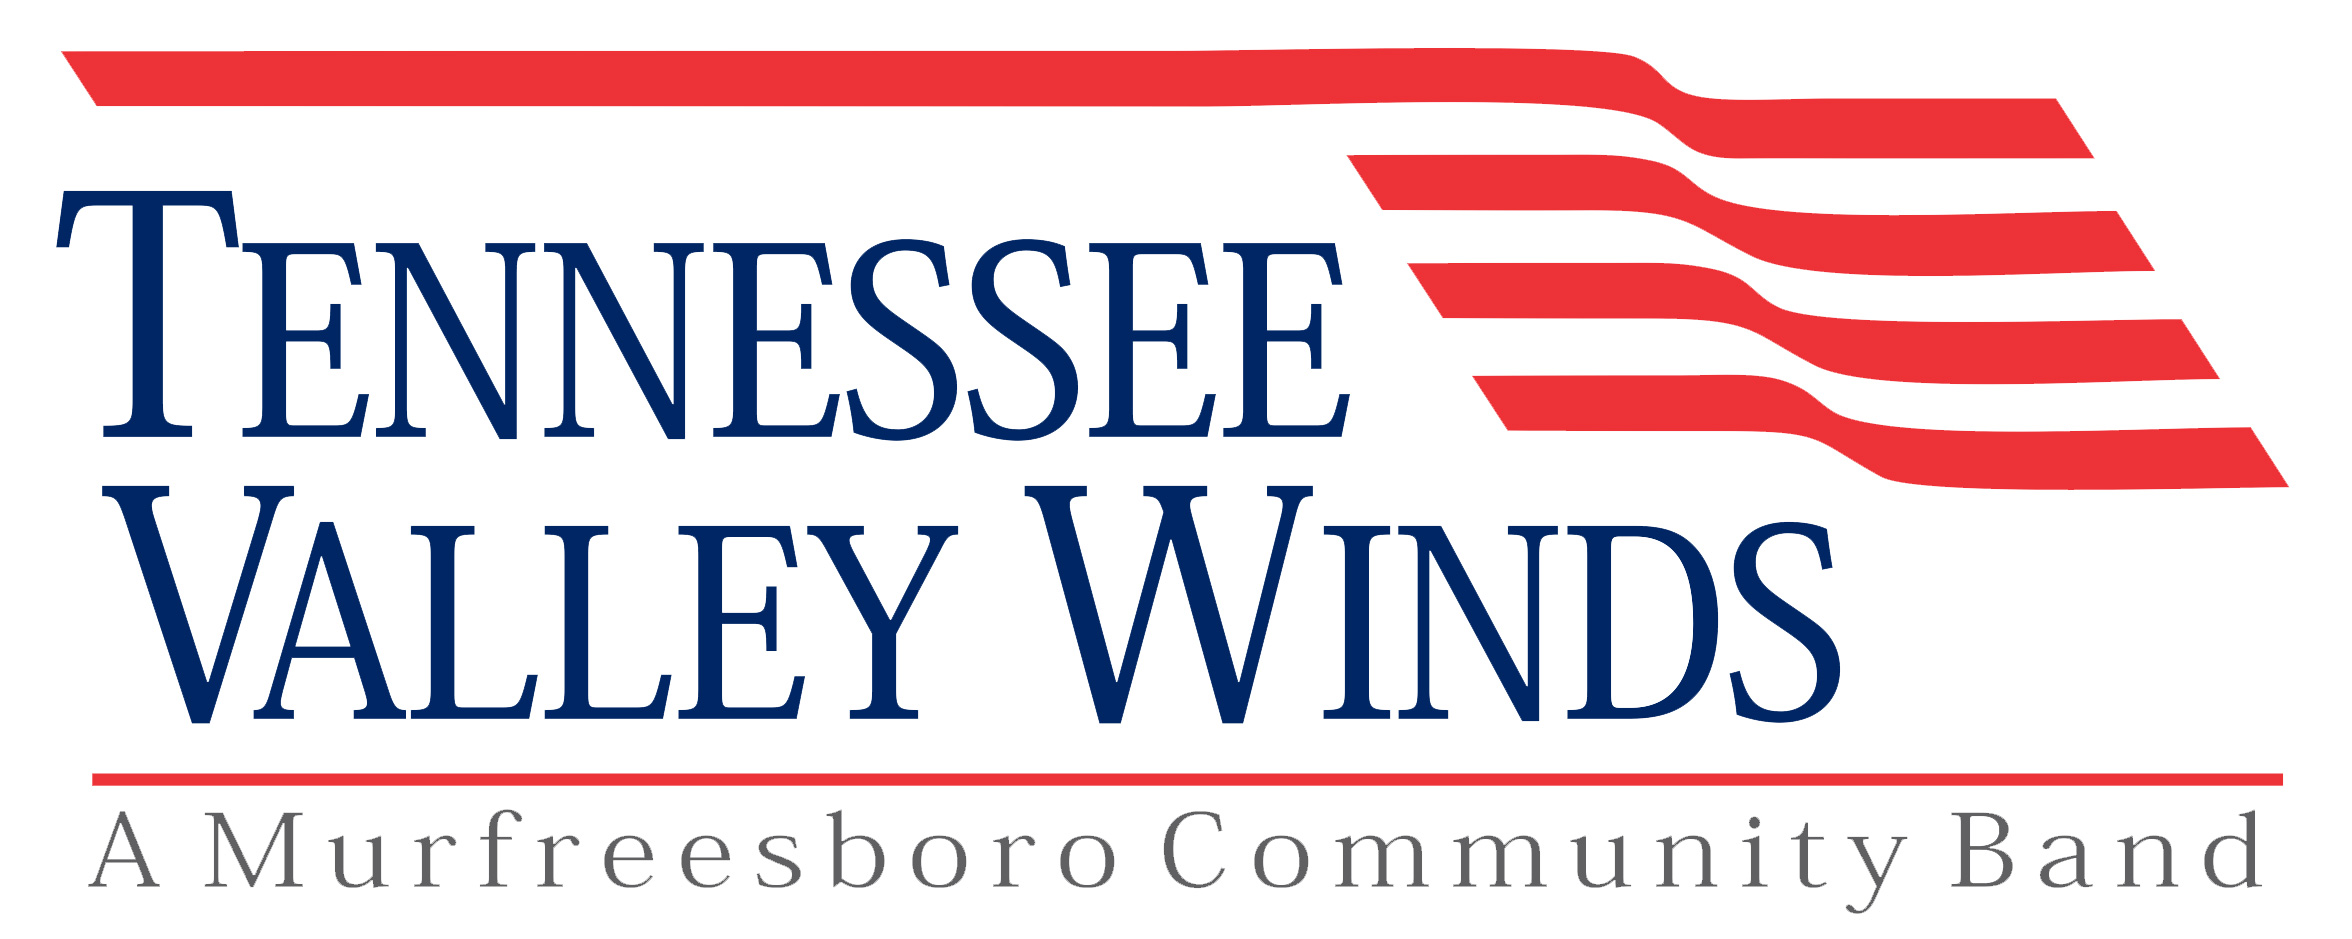 Tennessee Valley Winds - A Nashville/Murfreesboro Community Concert Band